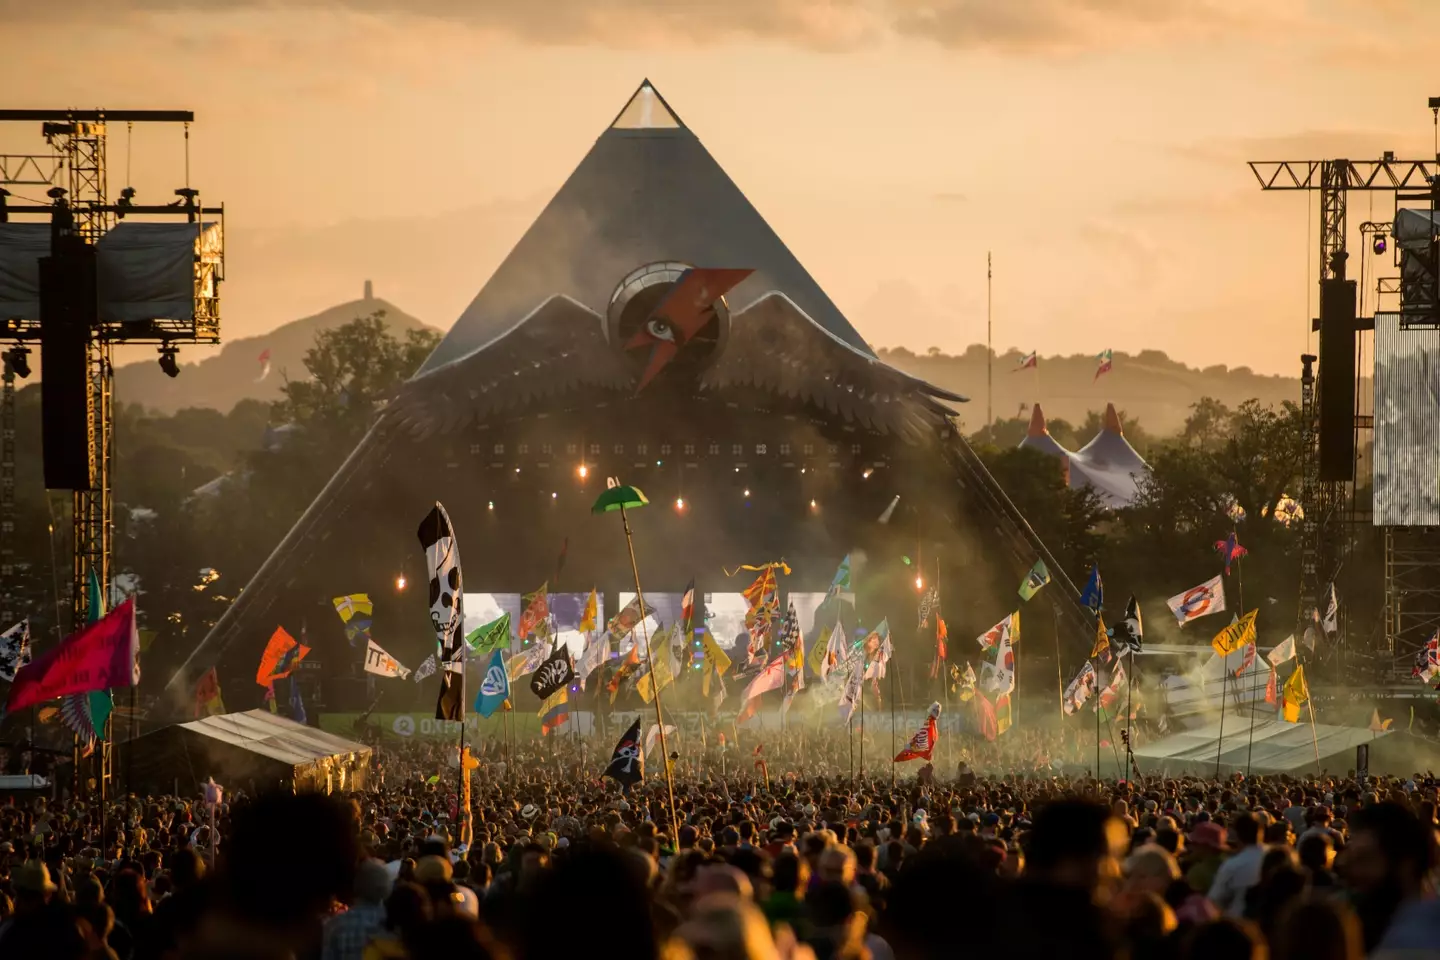 People heading to Glasto mistakenly end up in a small town nearby instead.